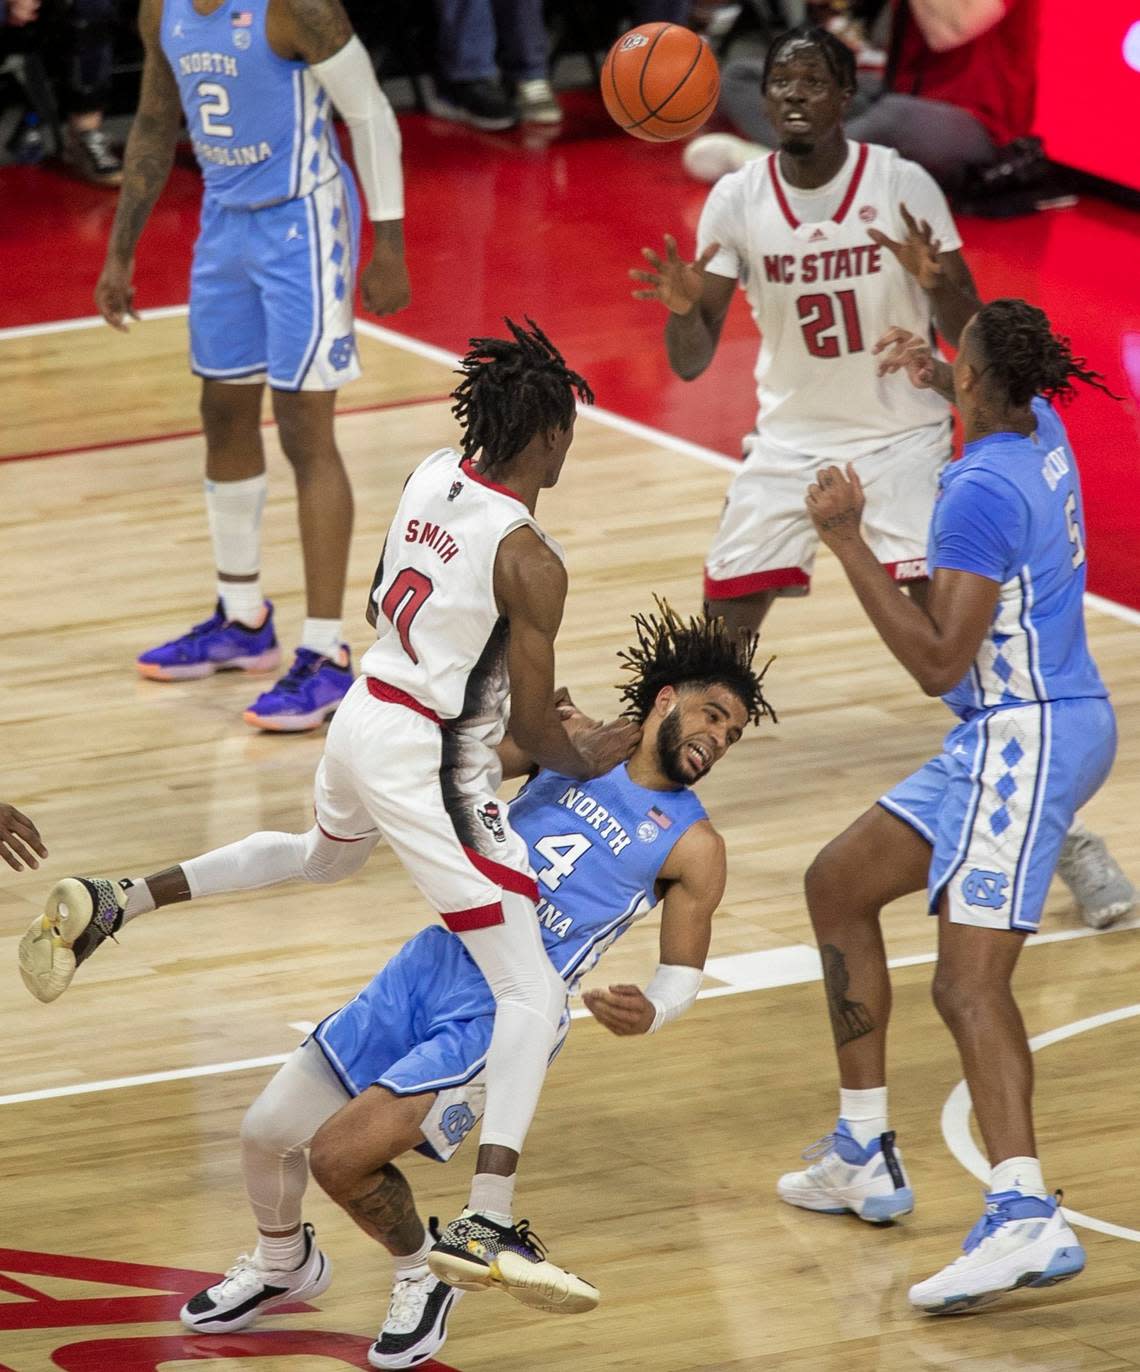 N.C. State’s Terquavion Smith (0) collies with North Carolina’s R.J. Davis (4) during the first half on Sunday, February 19, 2023 at PNC Arena in Raleigh, N.C. Davis was called for a blocking foul.